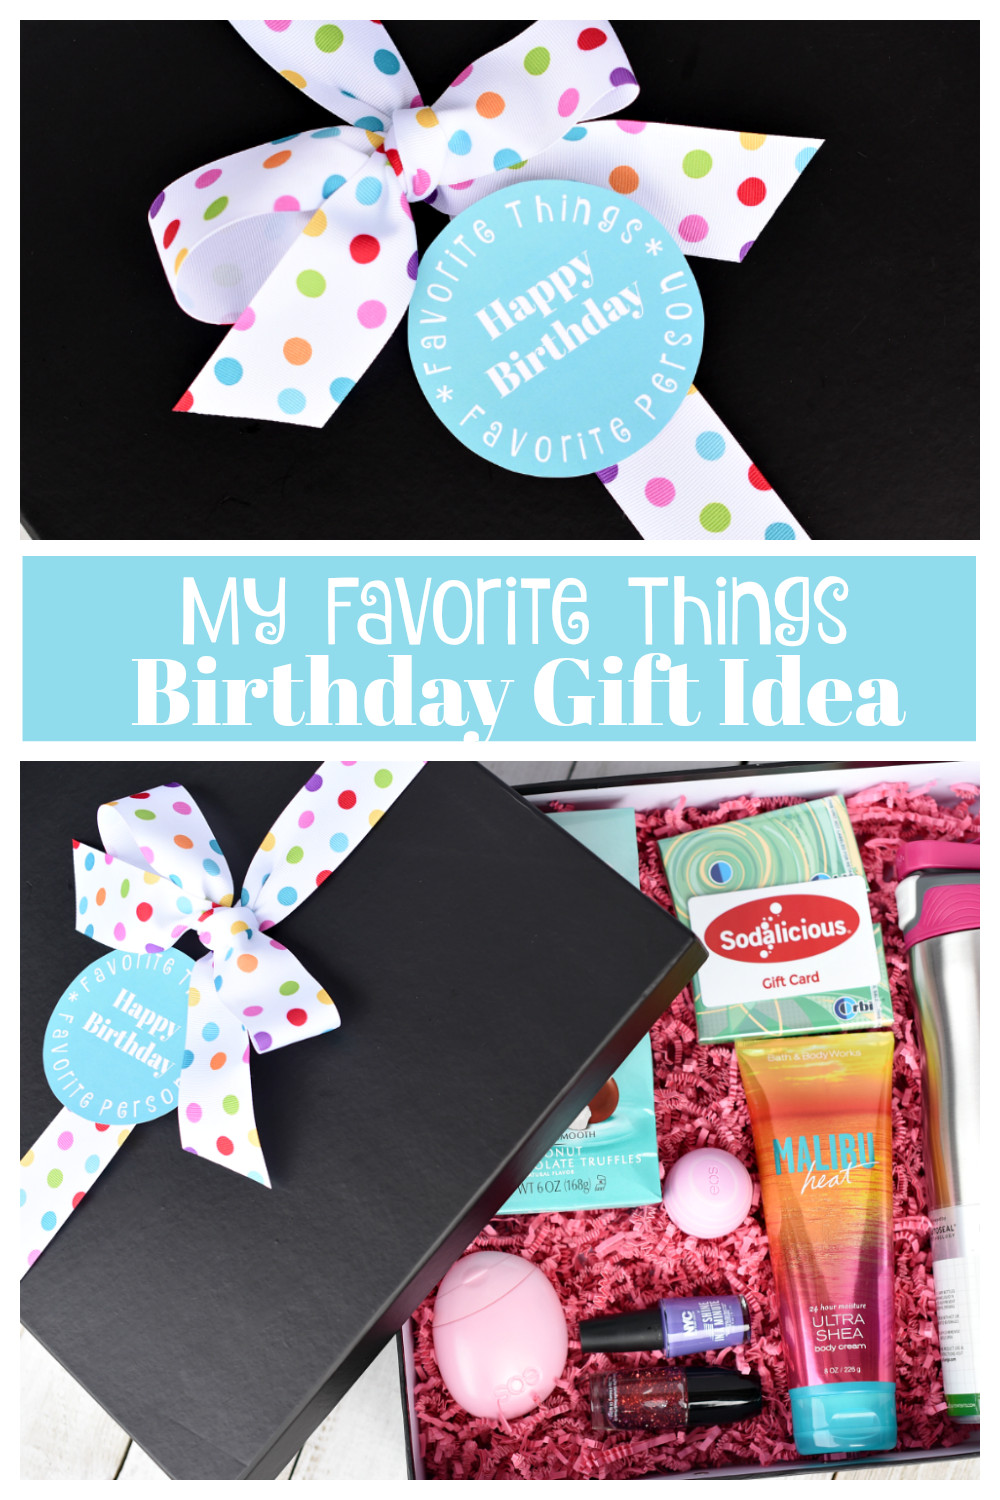 Best Birthday Gifts
 My Favorite Things Birthday Gifts for Your Best Friend